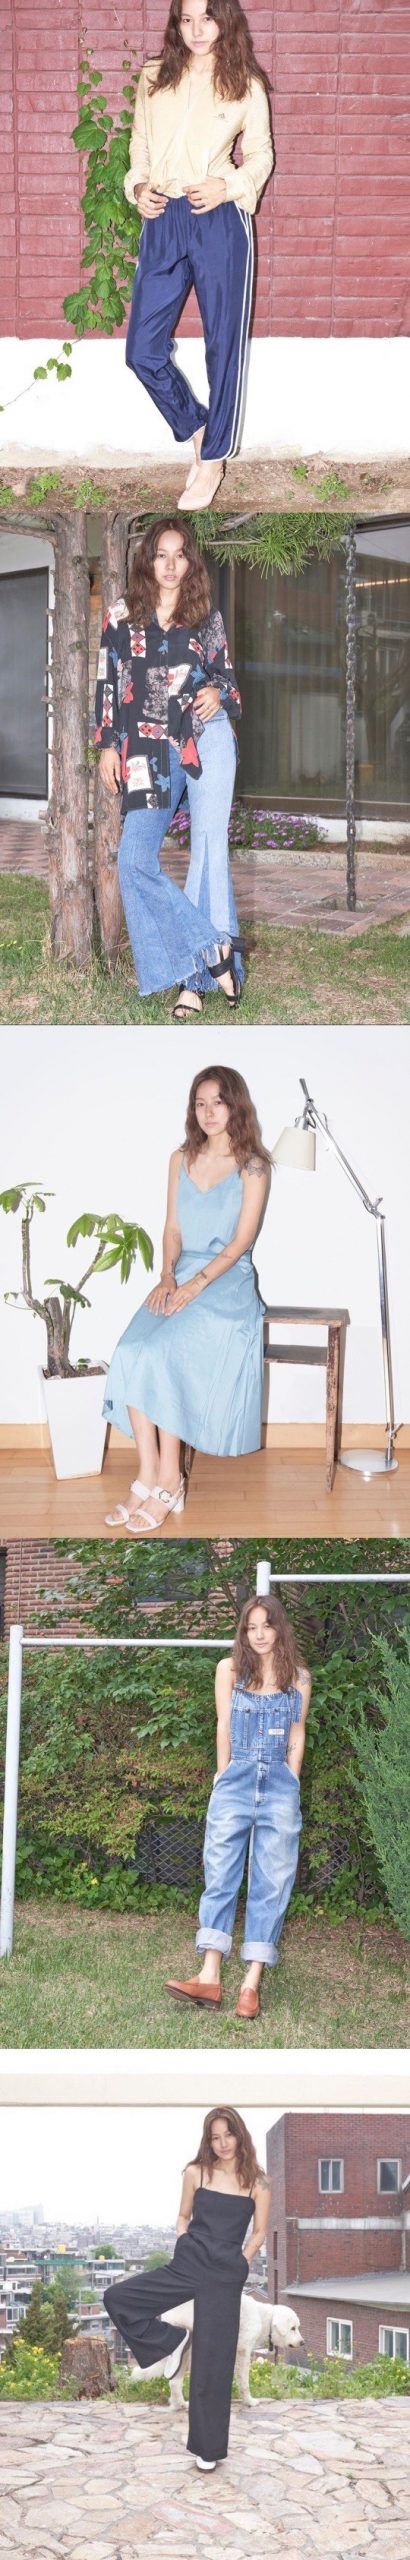 fashionista-lee-hyo-ri-shows-meaningful-new-fashion-photos-by-products-of-deaf-1